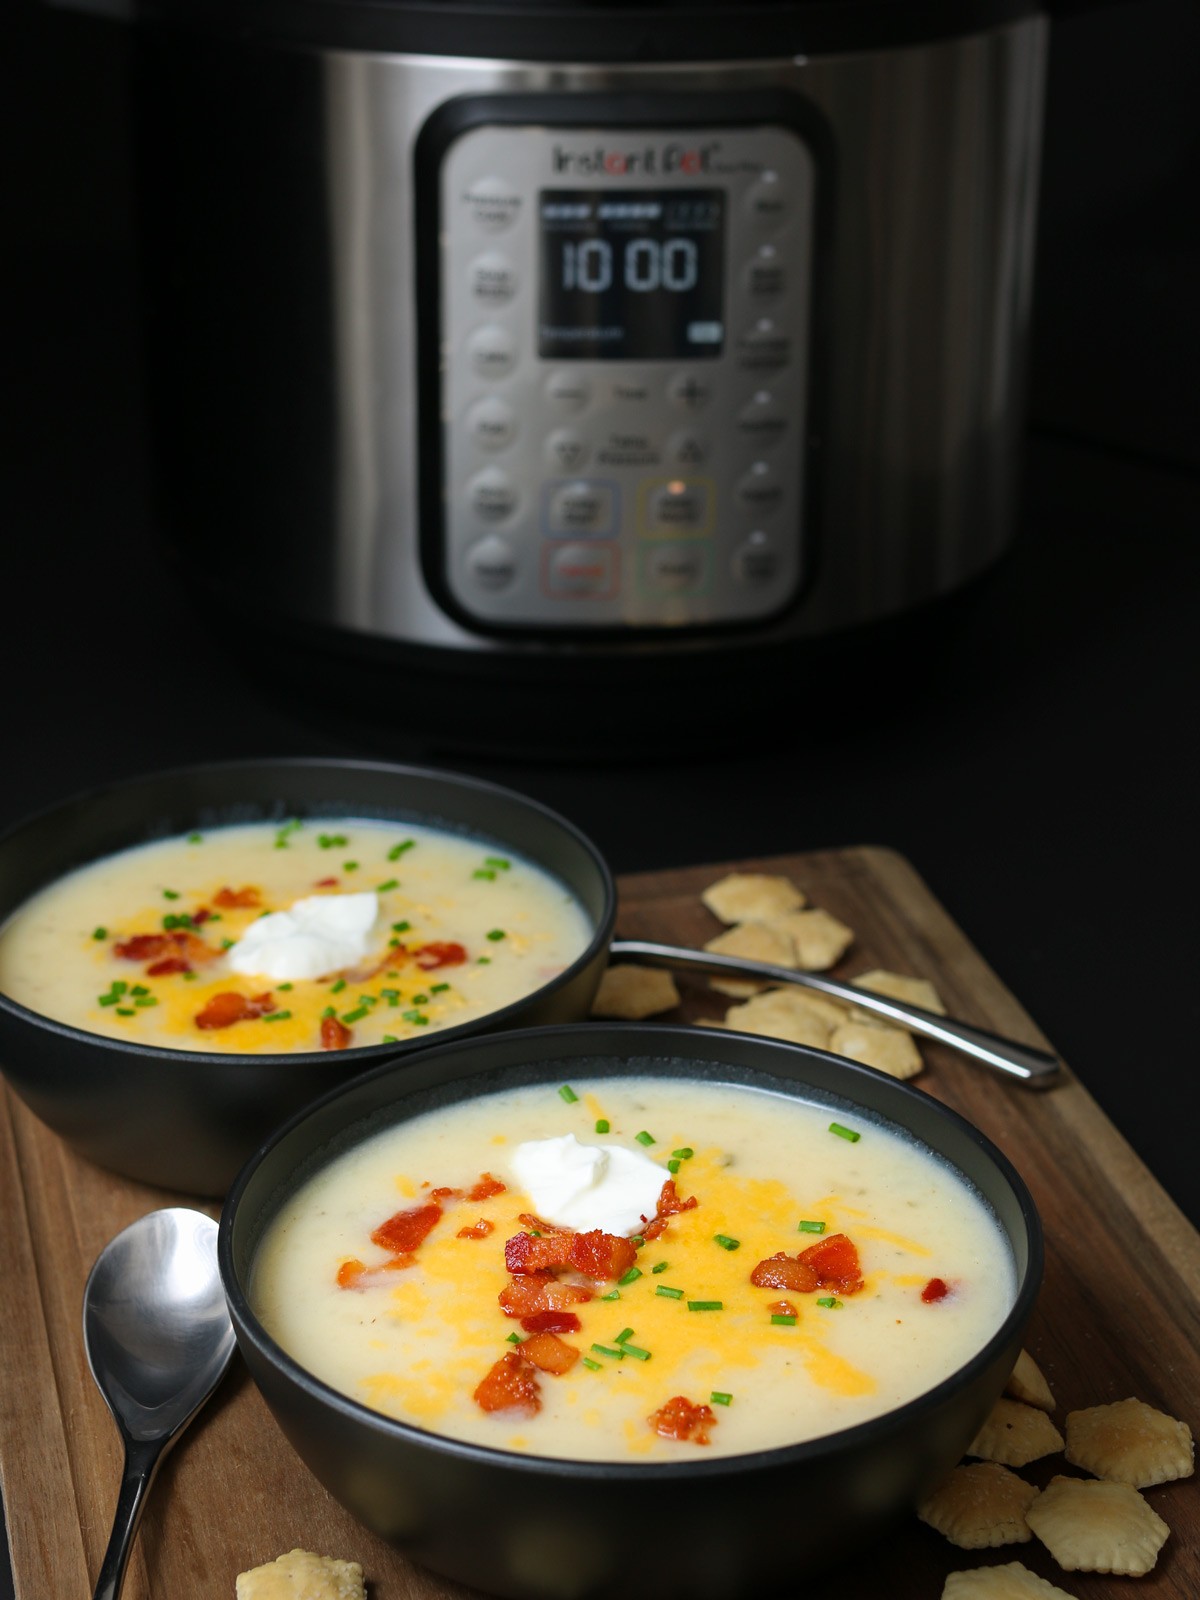 bowls of soup in front of instant pot on black table.